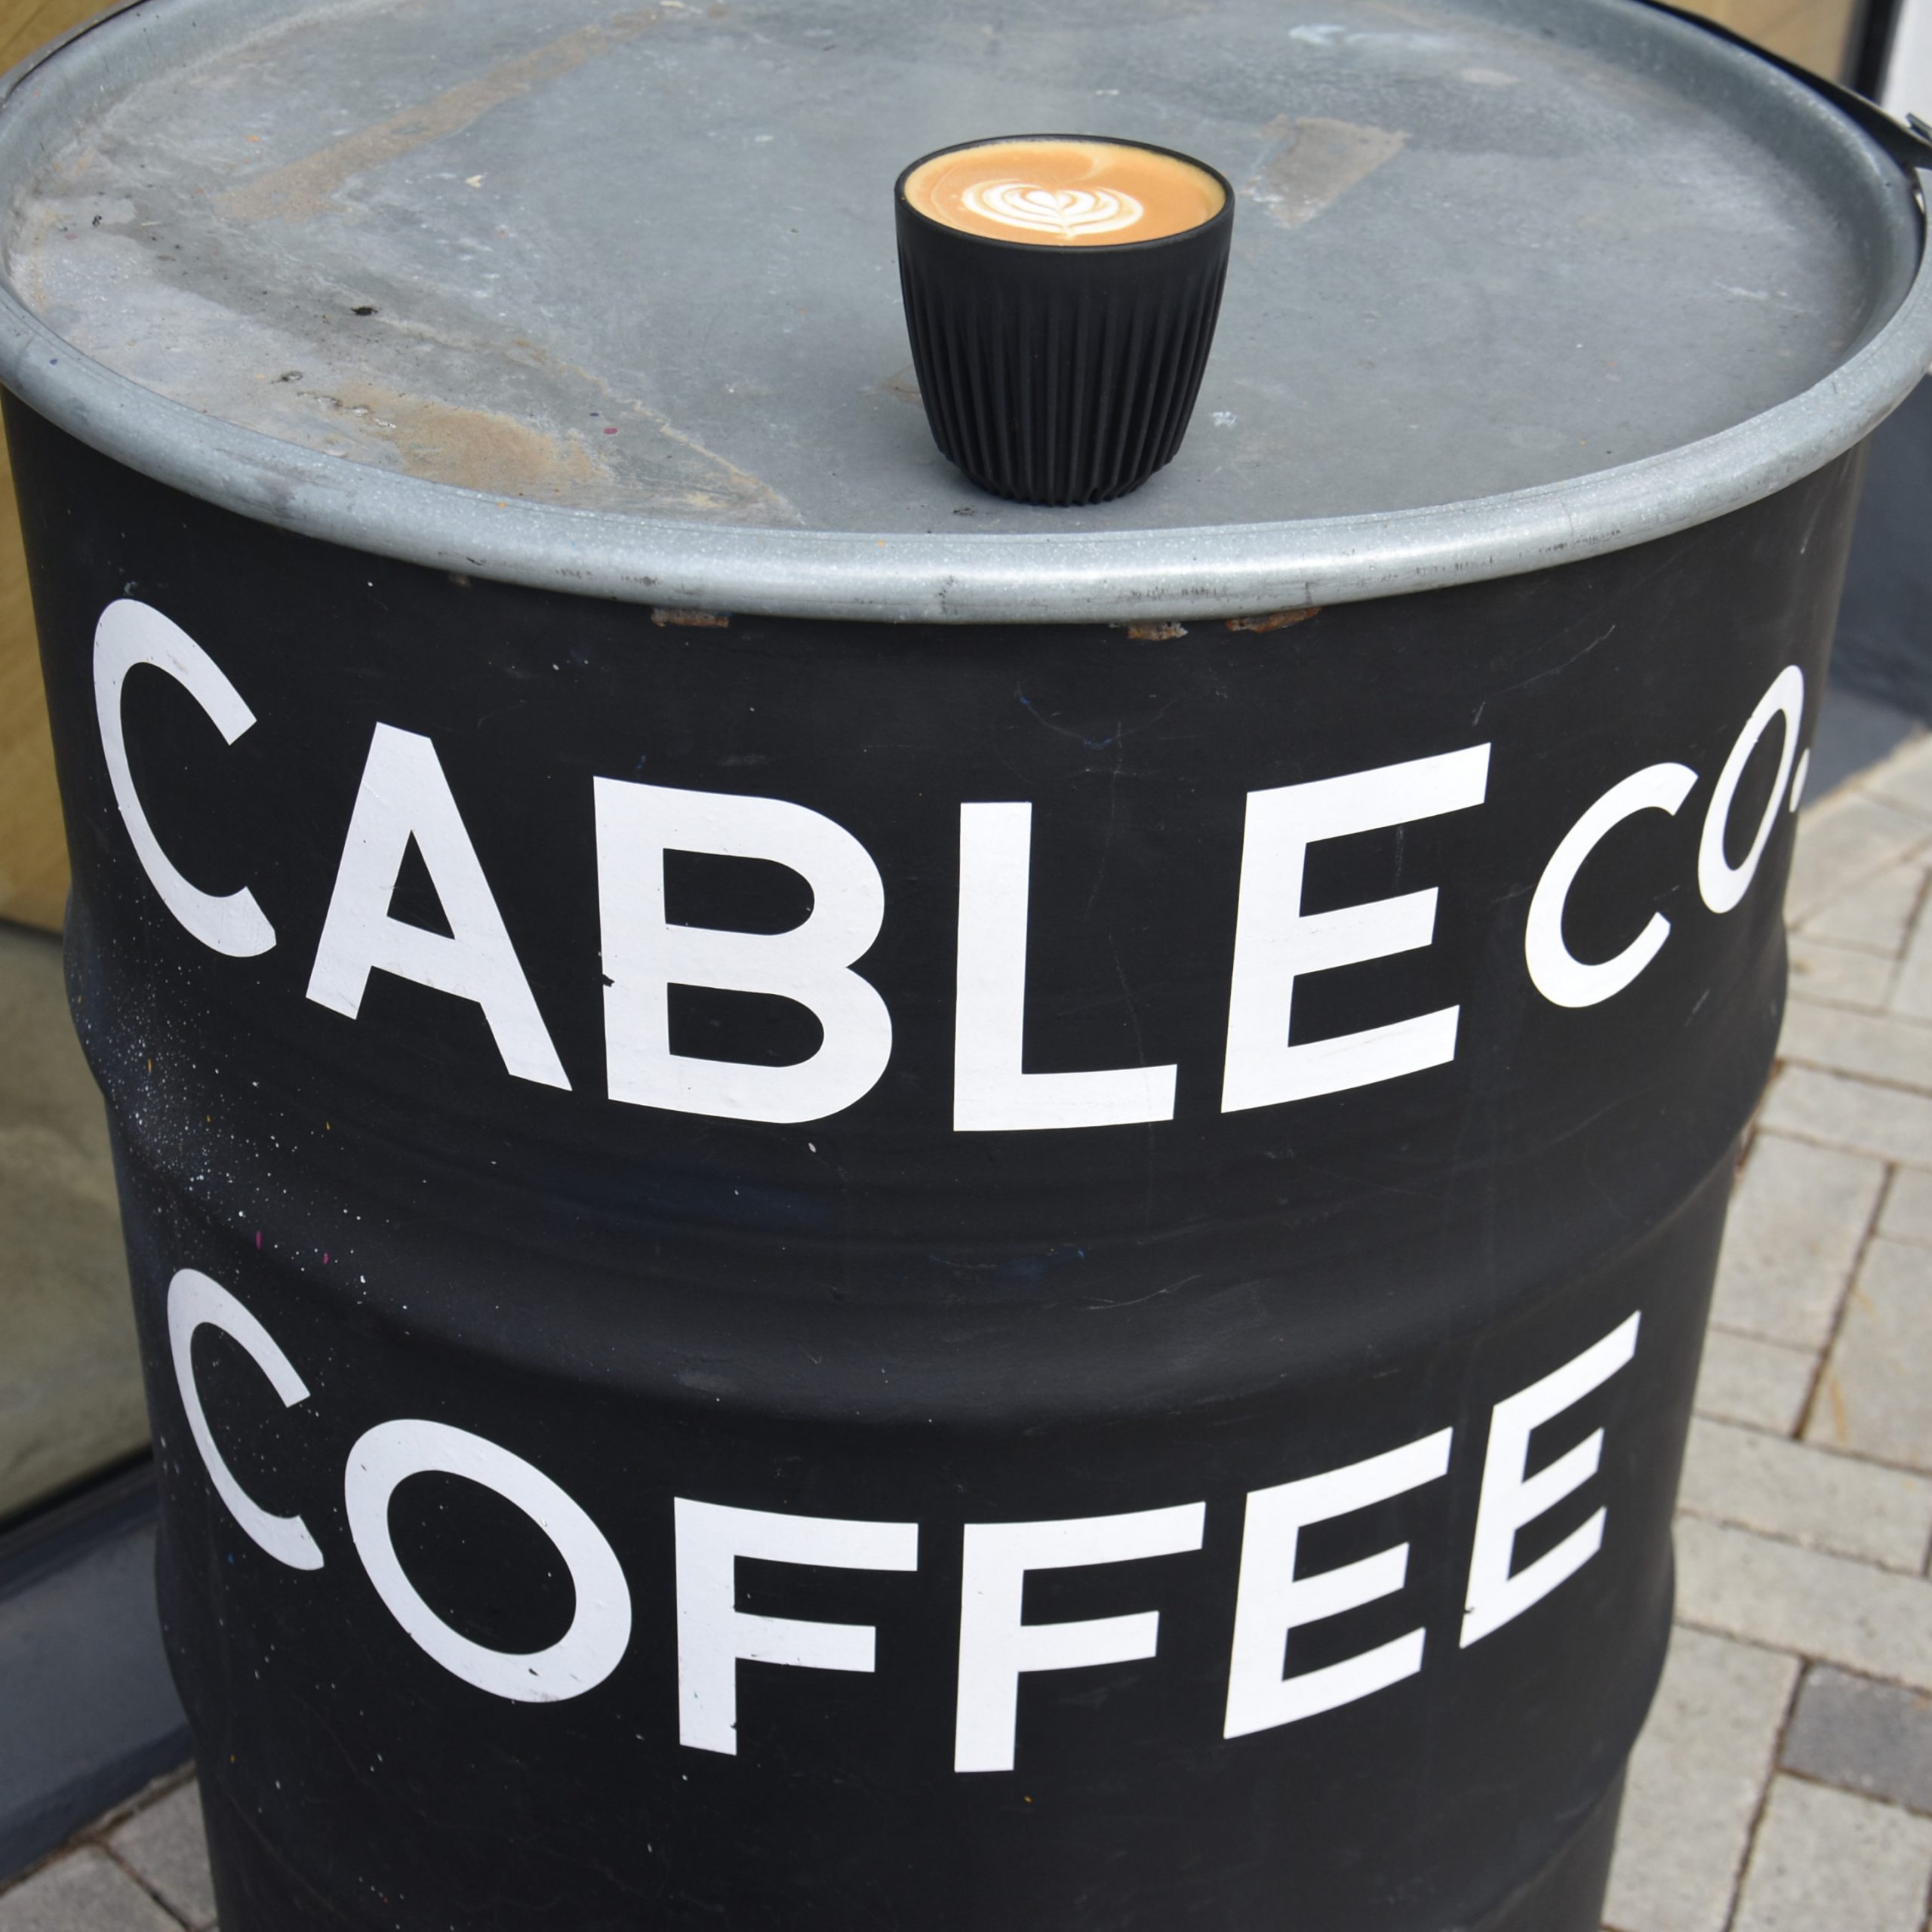 My decaf flat white on my HuskeeCup, sitting on an old barrel outside Cable Co. in The Aircraft Factory.